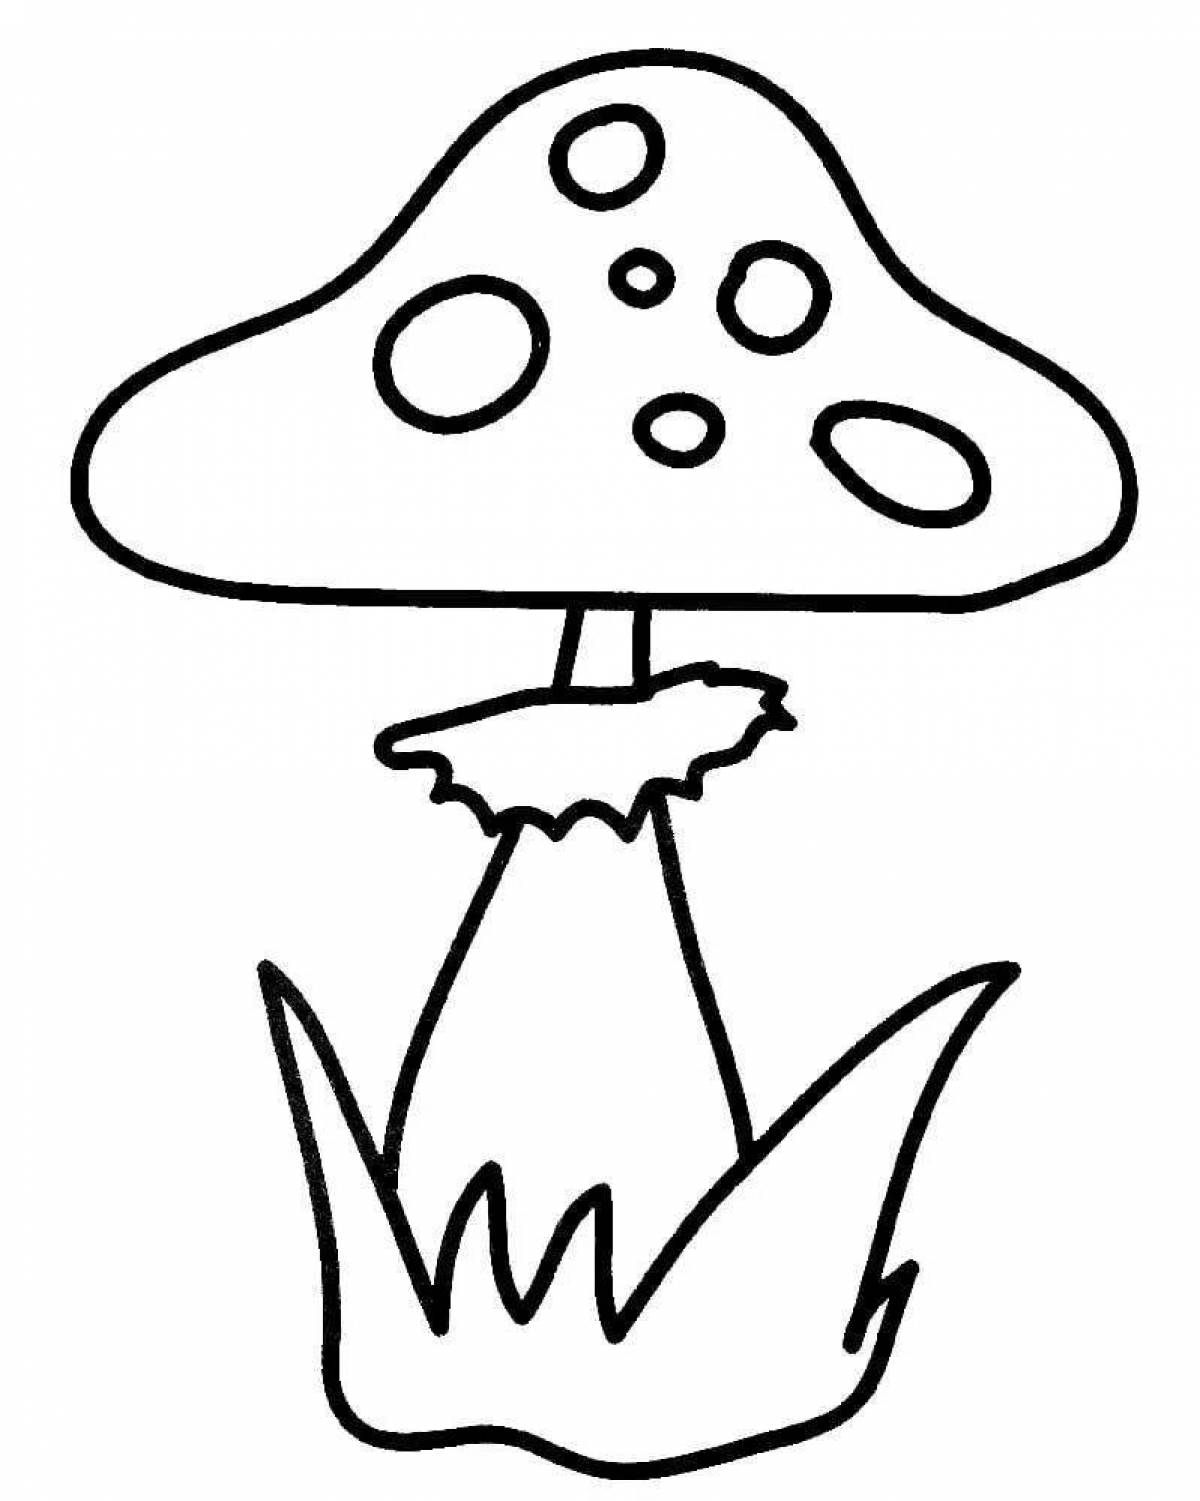 Outstanding fly agaric coloring page